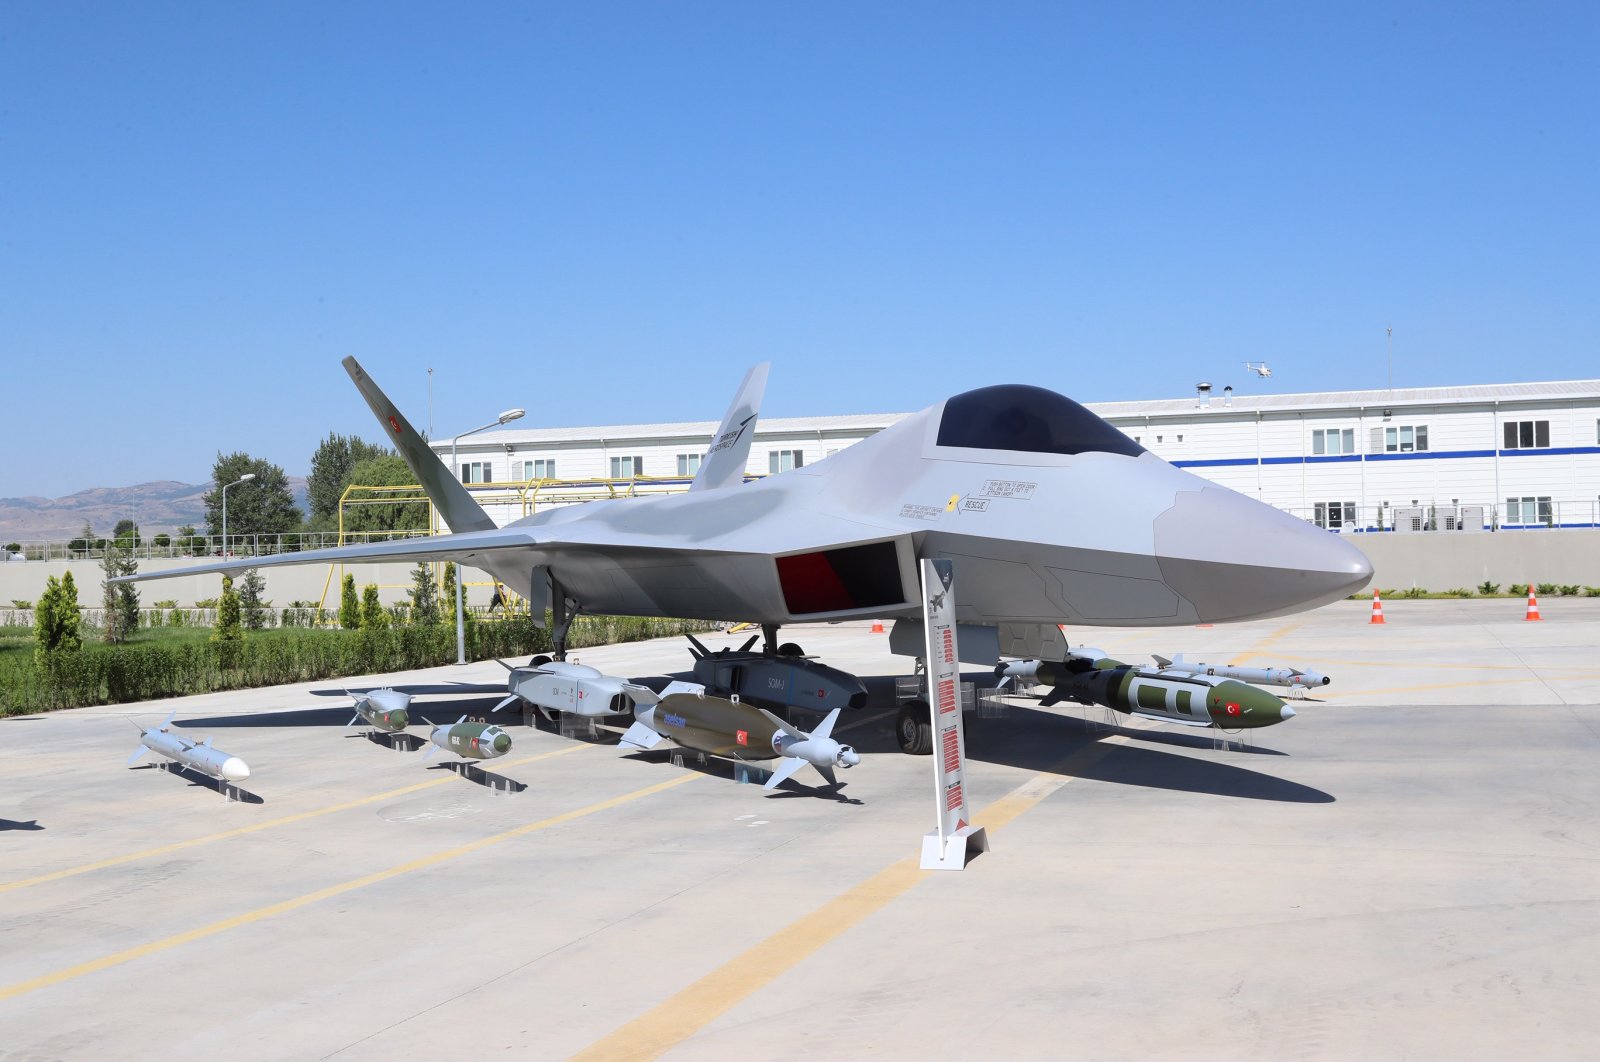 The prototype of Turkey’s national combat aircraft presented at an aviation, space and technology fair held in Istanbul, September 16, 2019. (File Photo)